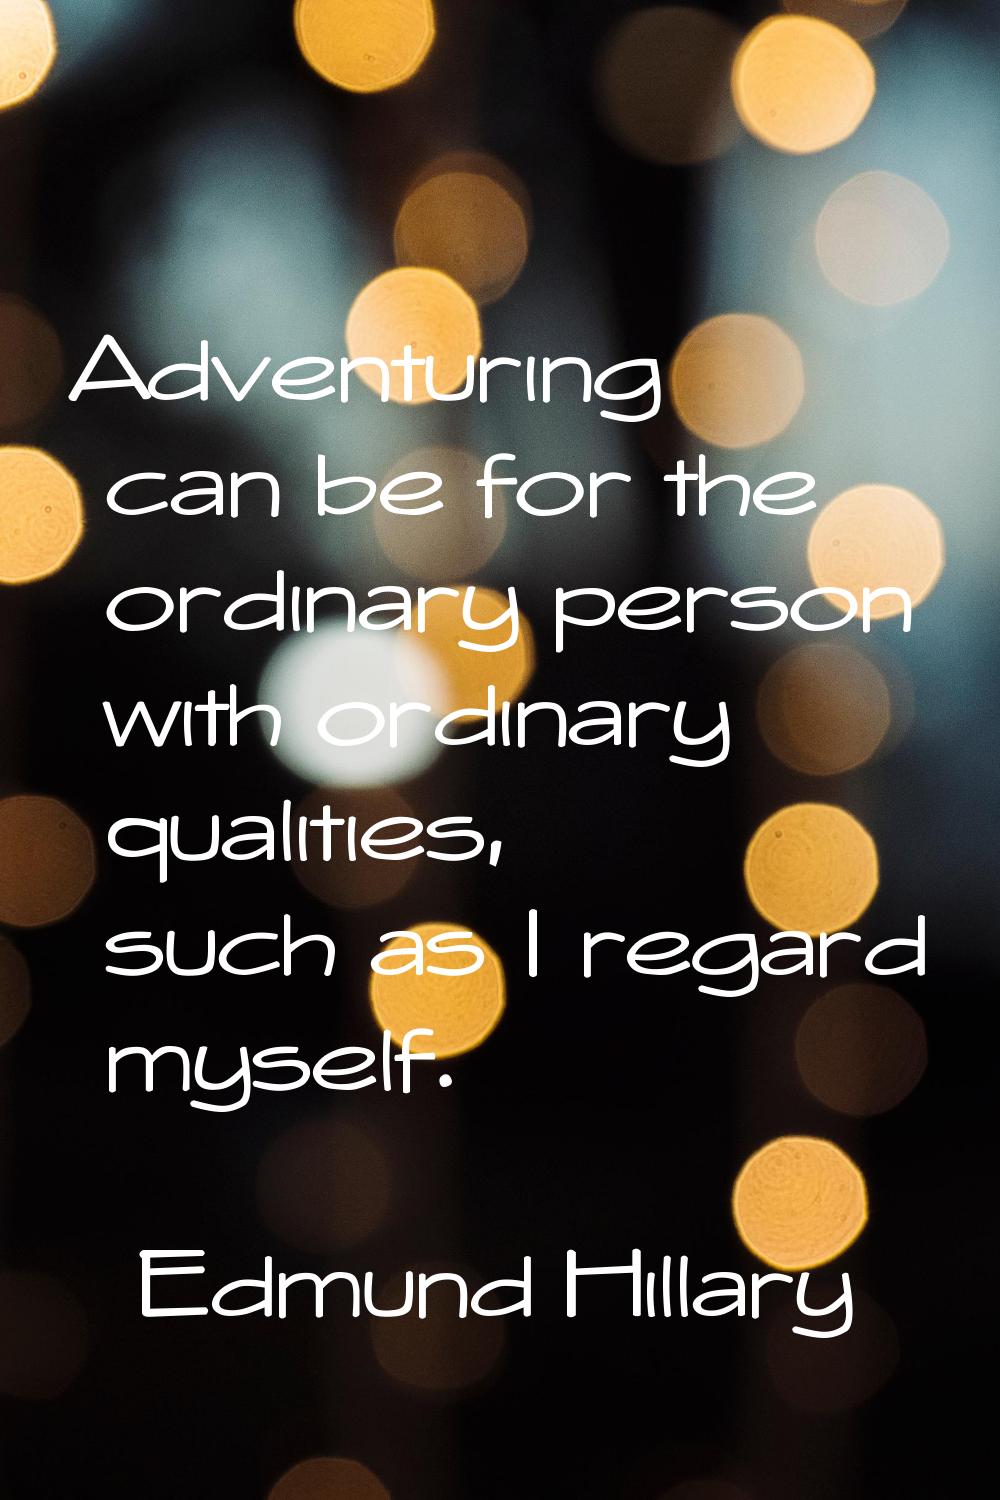 Adventuring can be for the ordinary person with ordinary qualities, such as I regard myself.